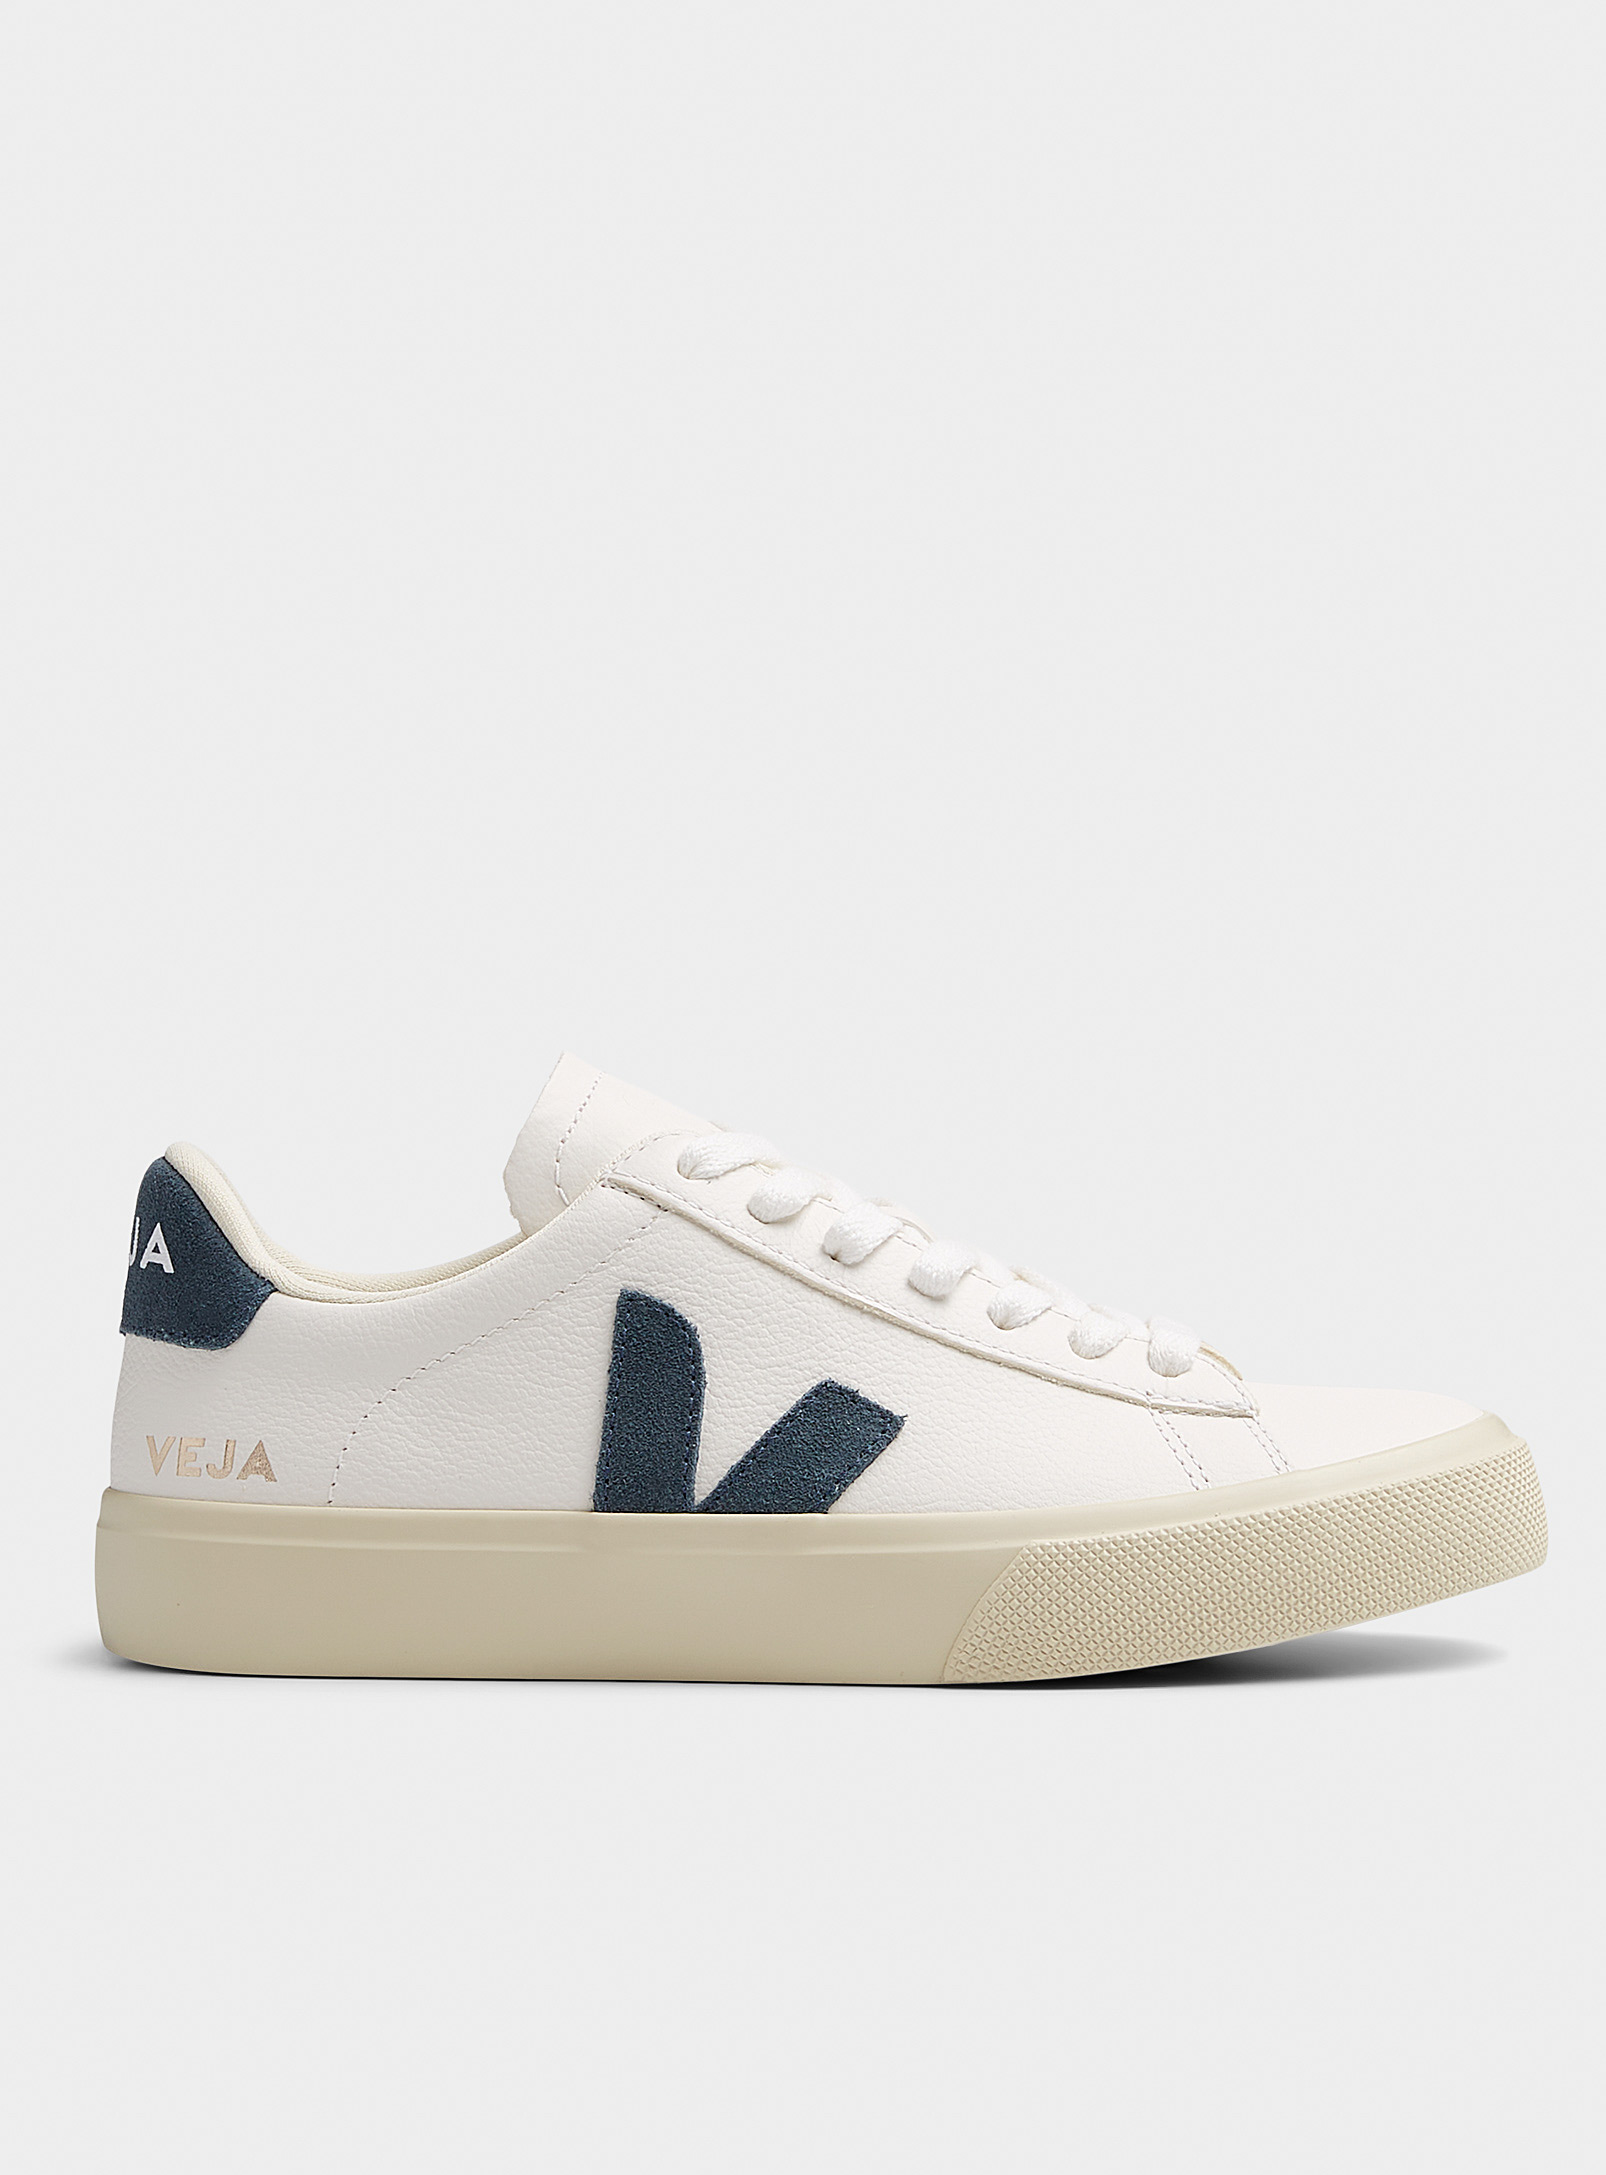 Veja Campo Sneakers Women In Blue